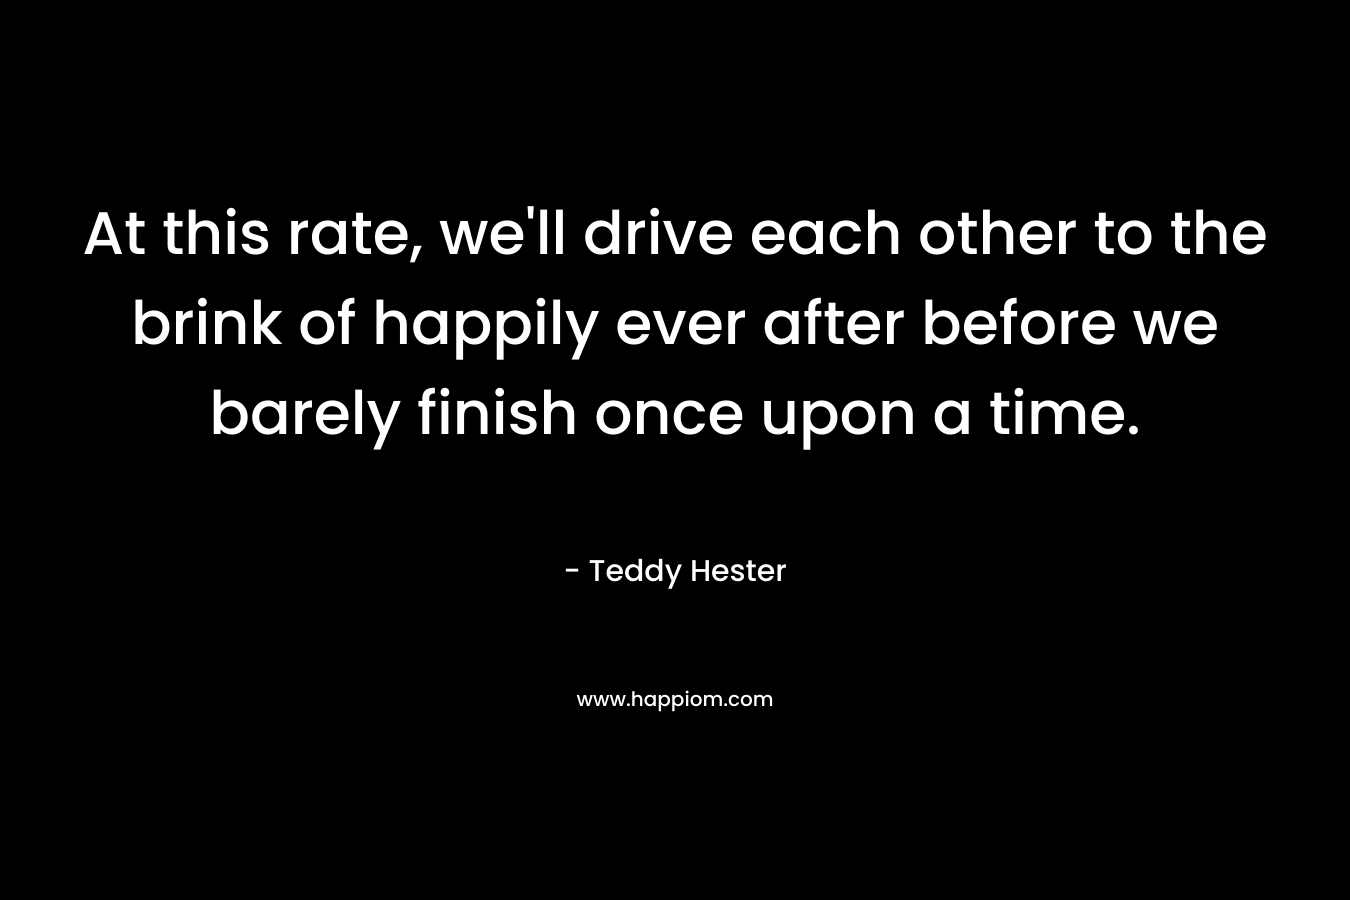 At this rate, we’ll drive each other to the brink of happily ever after before we barely finish once upon a time. – Teddy Hester